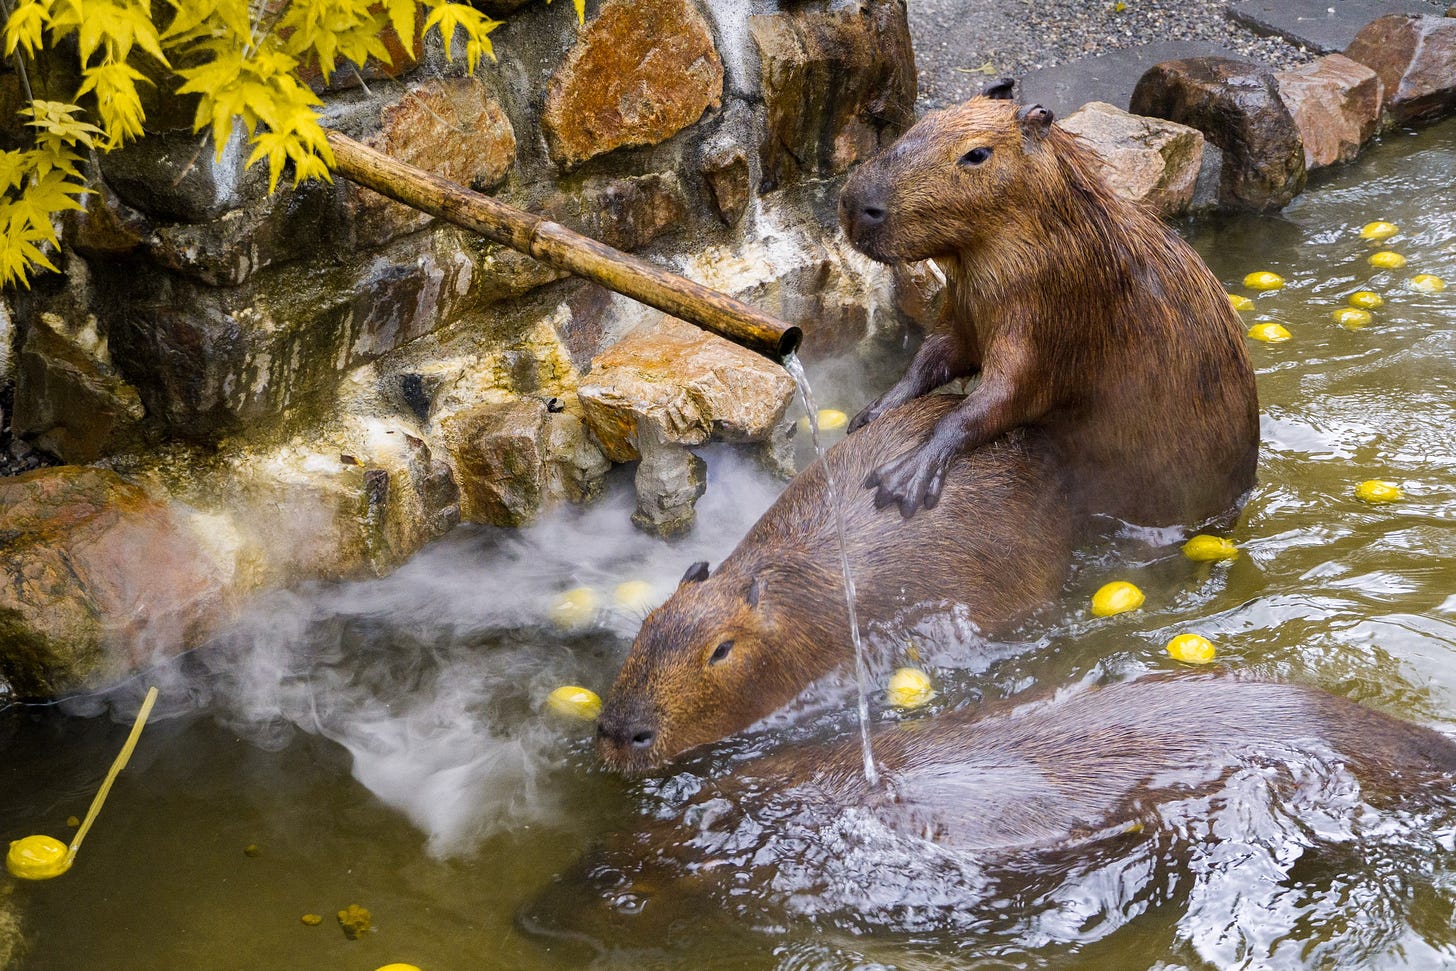 Two capybara in a steaming pool with floating lemons inside